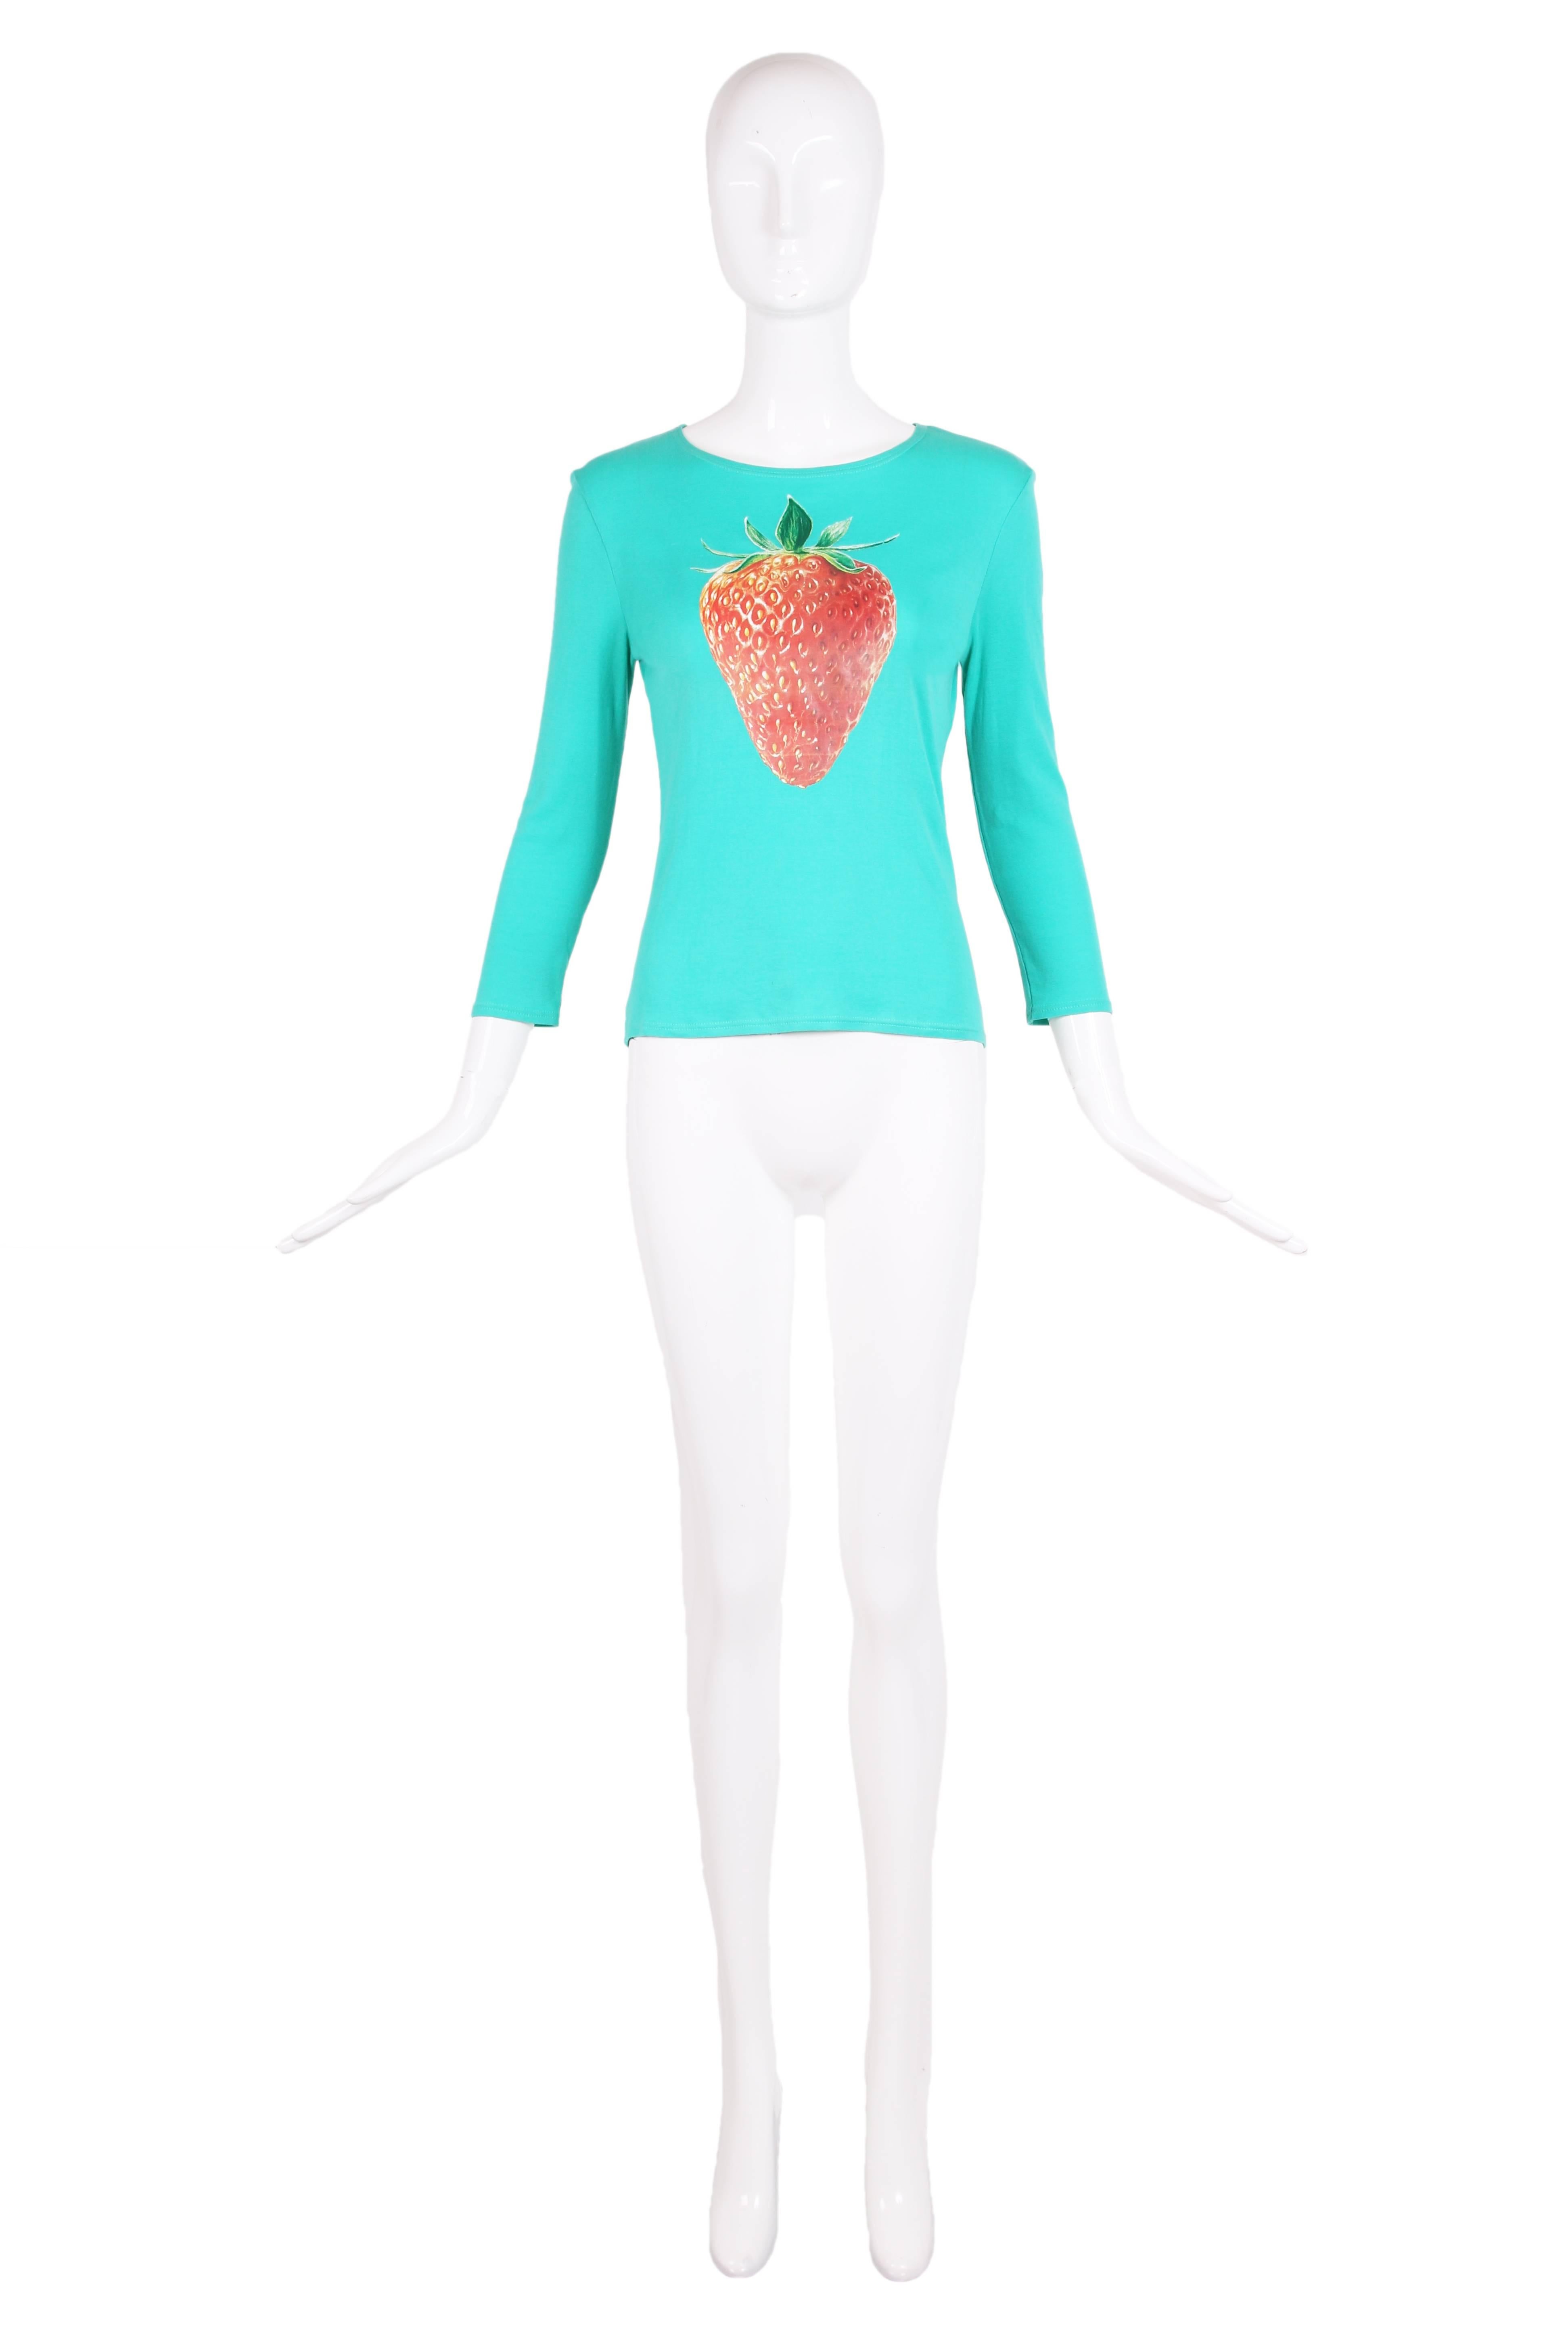 Iconic and collectible Chloe from the Stella McCartney-era strawberry graphic long sleeved 100% cotton t-shirt with a scooped neck. Sleeves are a little bit longer than a 3/4 length. In excellent condition, size tag S. 
MEASUREMENTS:
Shoulders -